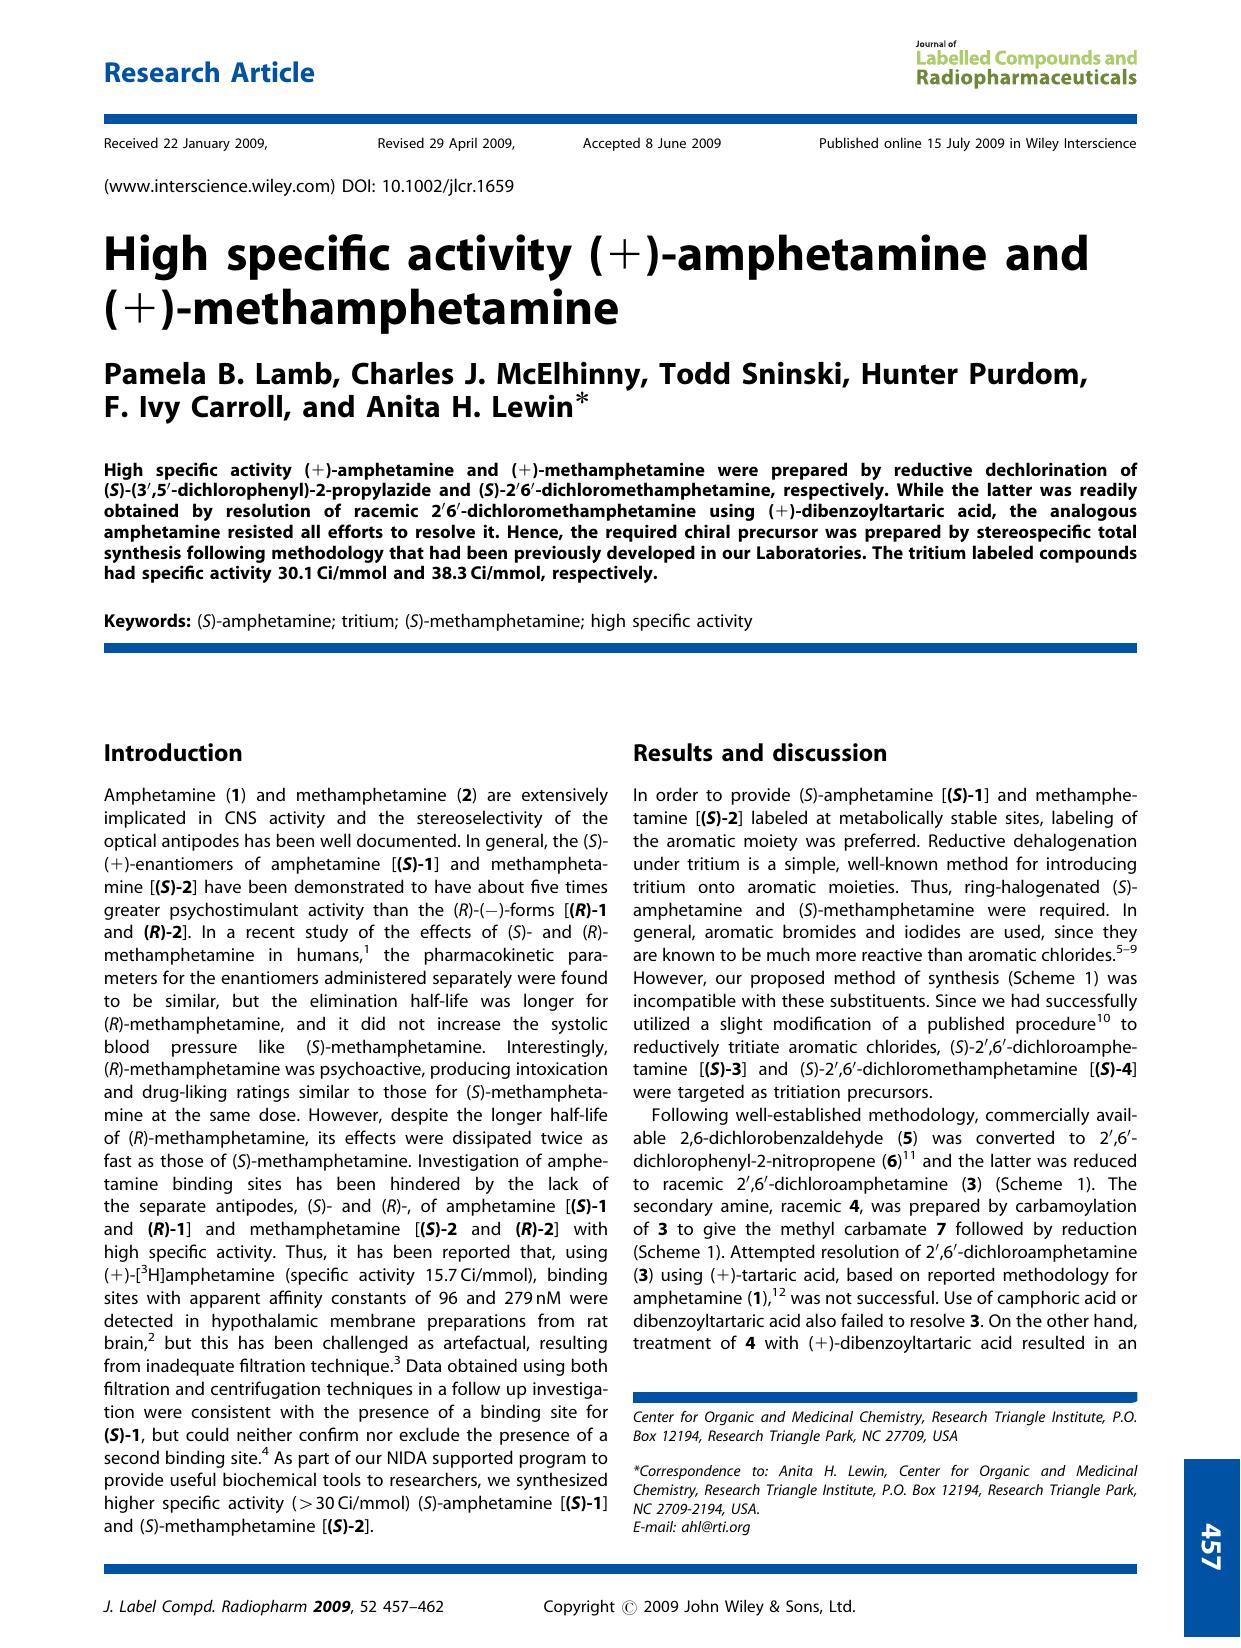 High specific activity (+)-amphetamine and (+)-methamphetamine by Unknown